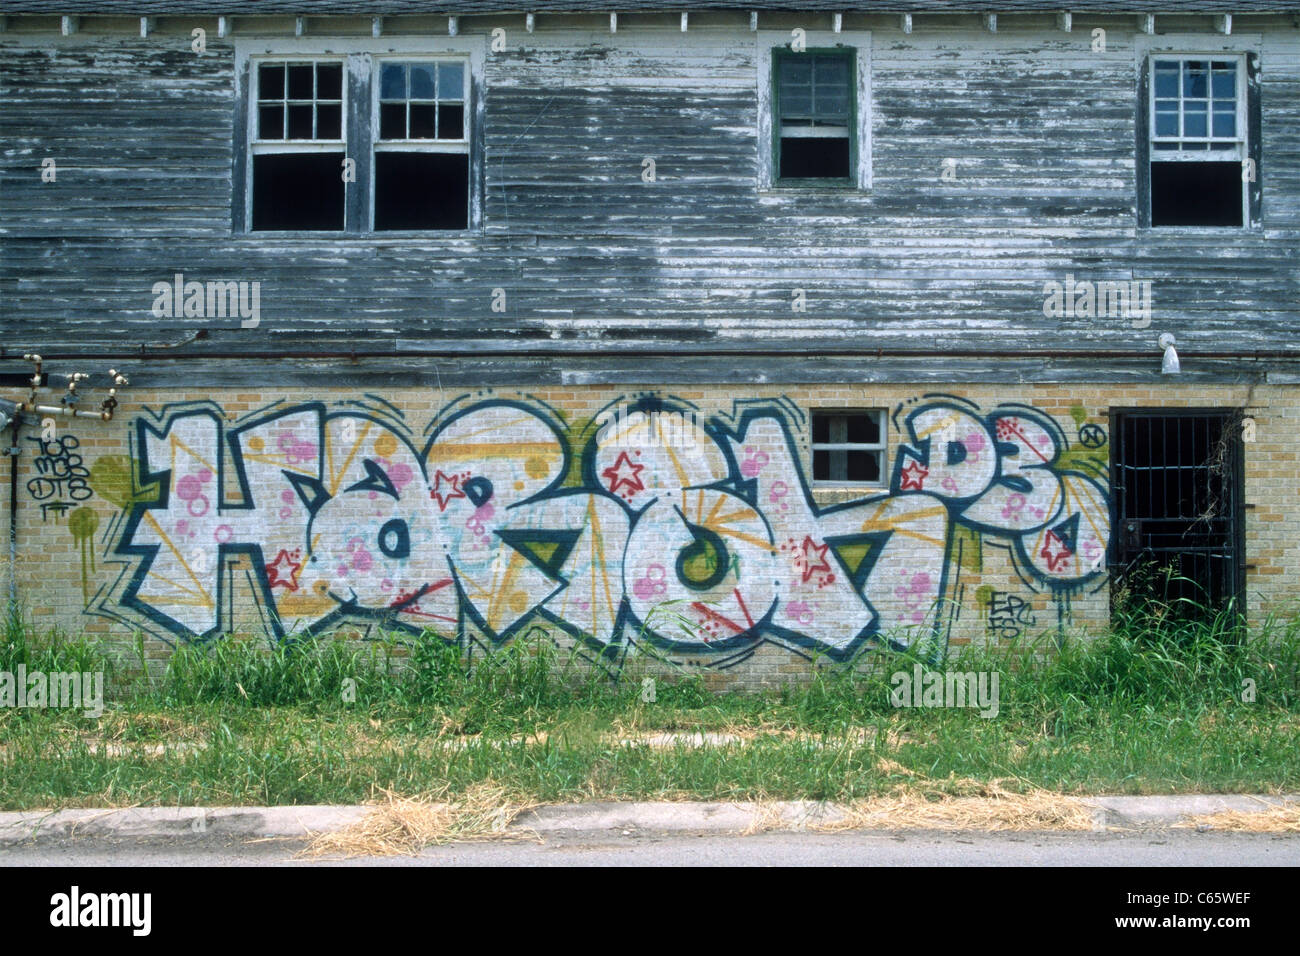 Graffiti in the Lower Ninth Ward, New Orleans. Stock Photo